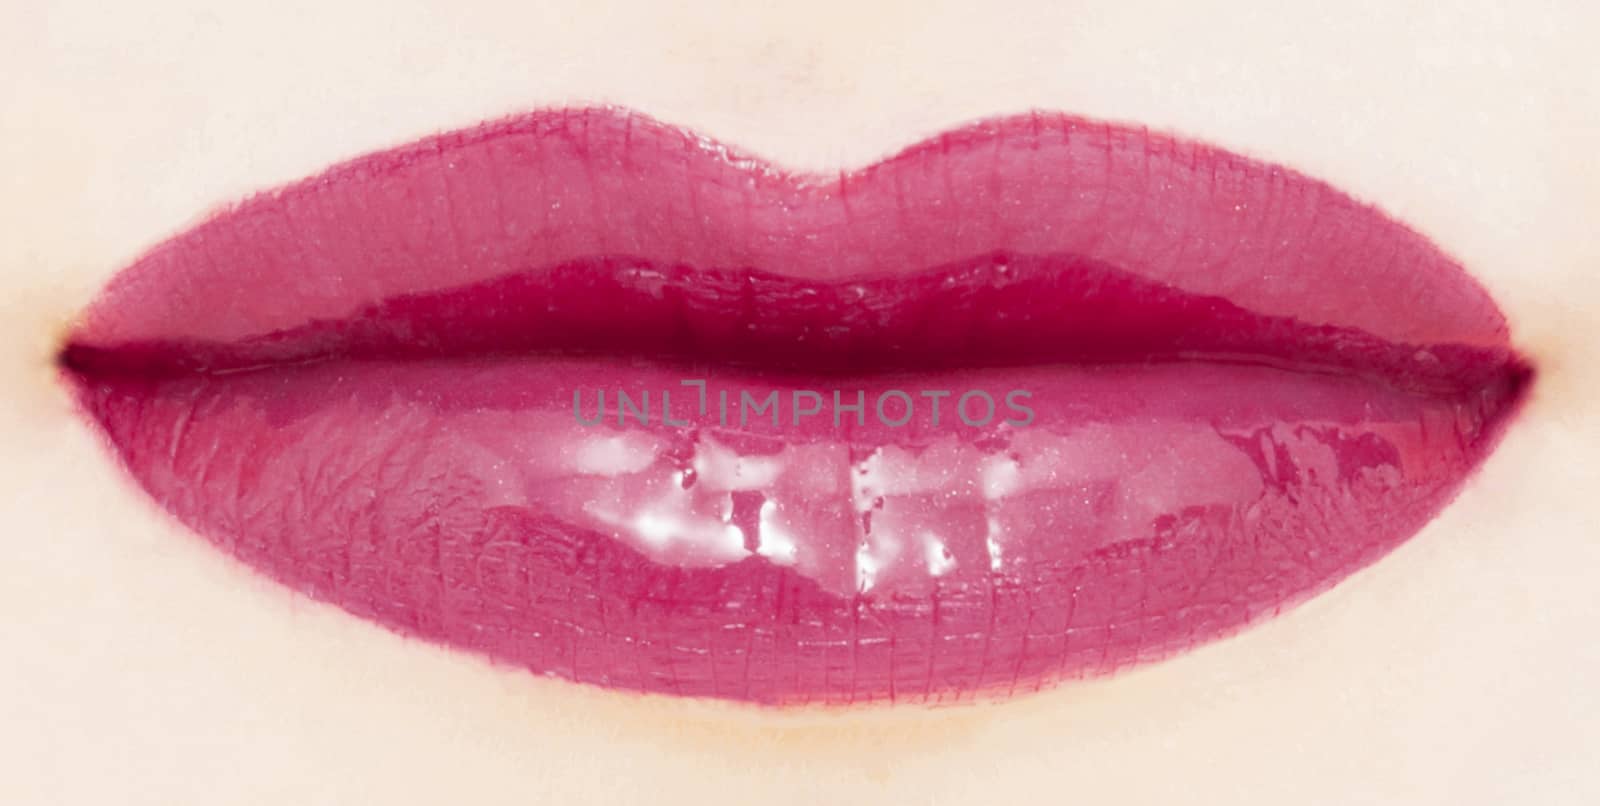 Female lips with glossy lipstick or lip gloss for make-up and beauty by Anneleven